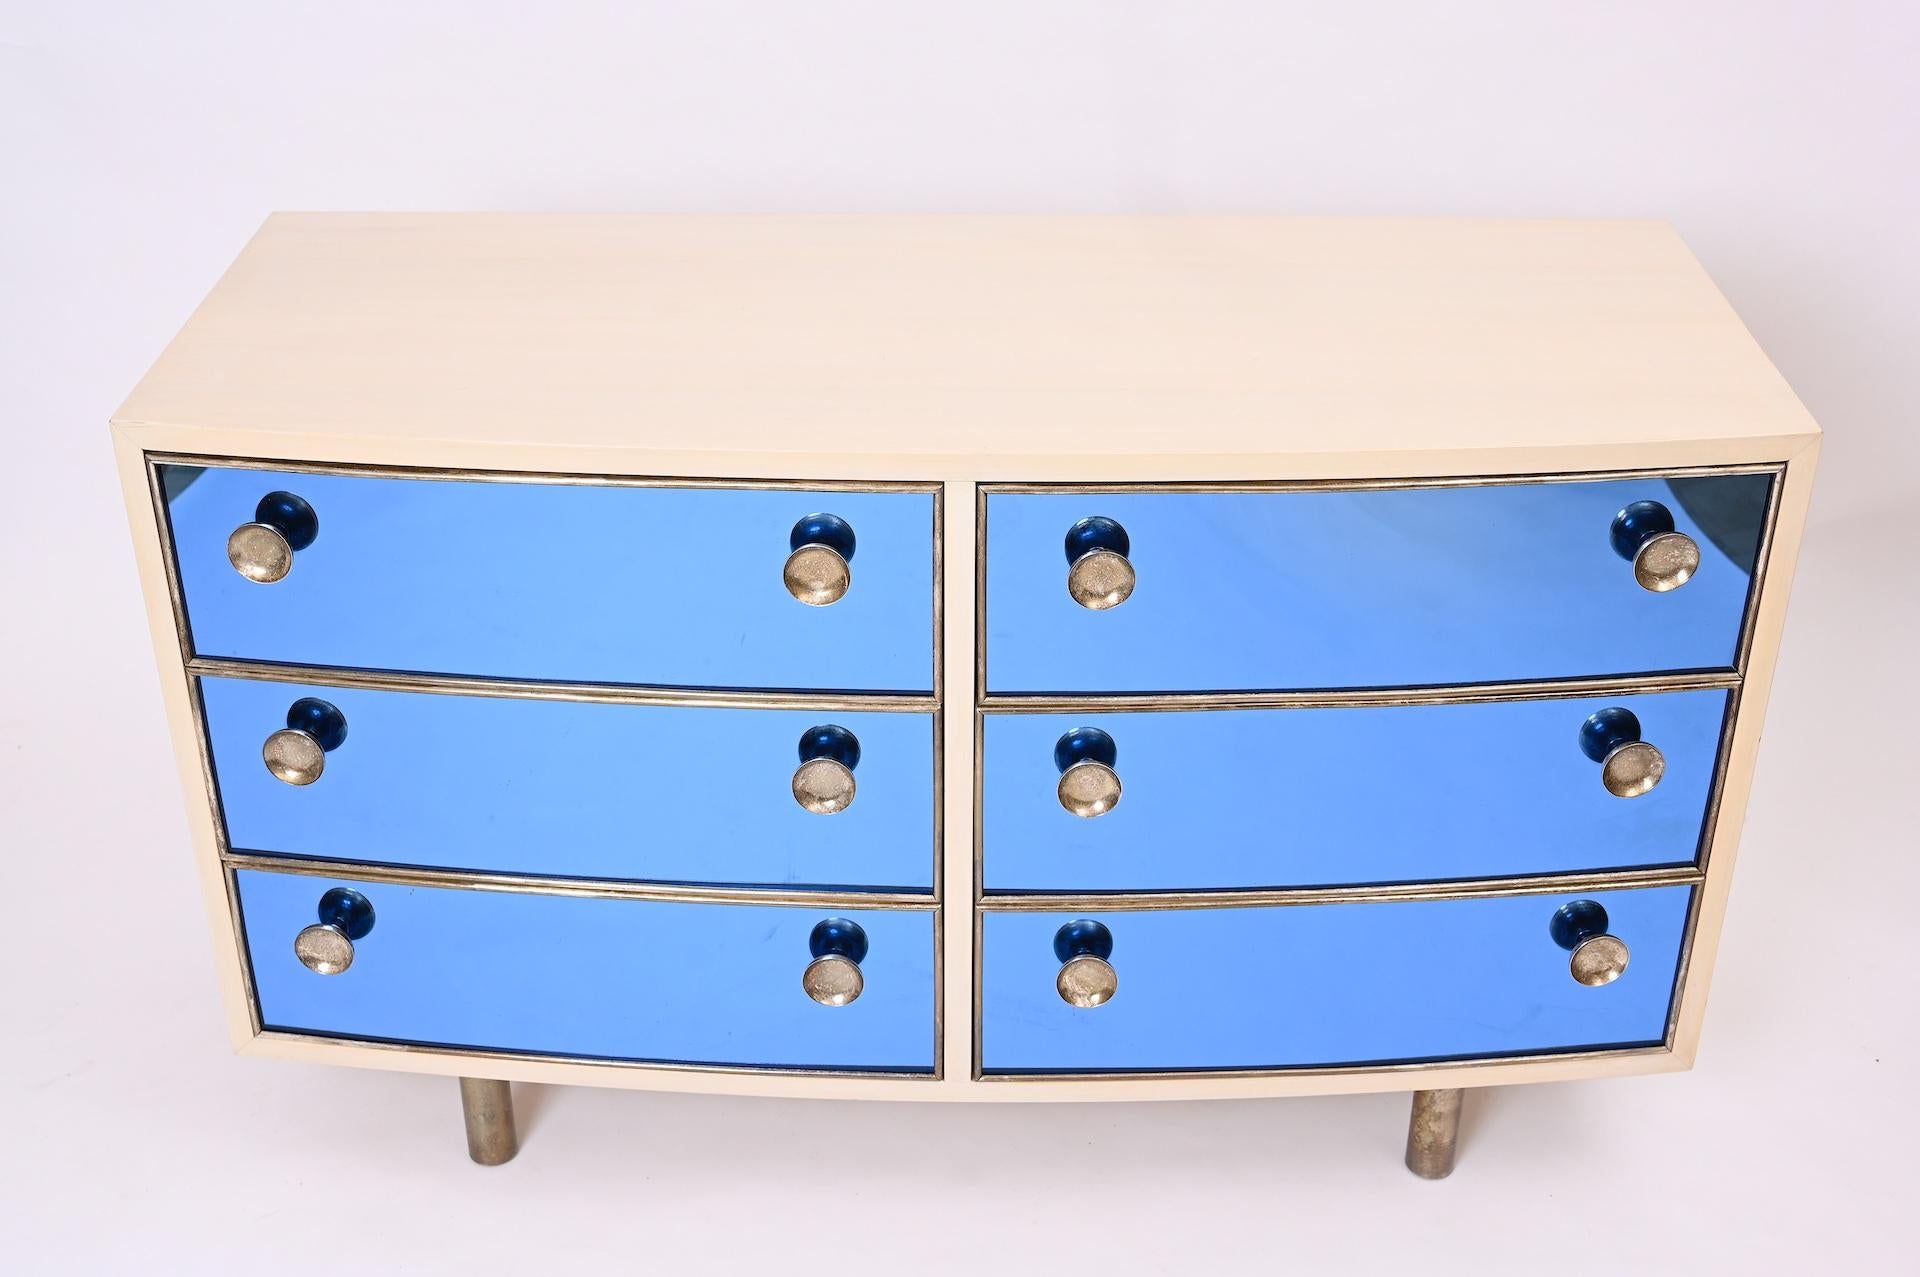 In style of Gio Ponti and Pietro Chiesa

Blonde wood. Blue crystal glass. Brass Curved front commode with six drawers. 

Exceptional quality. 